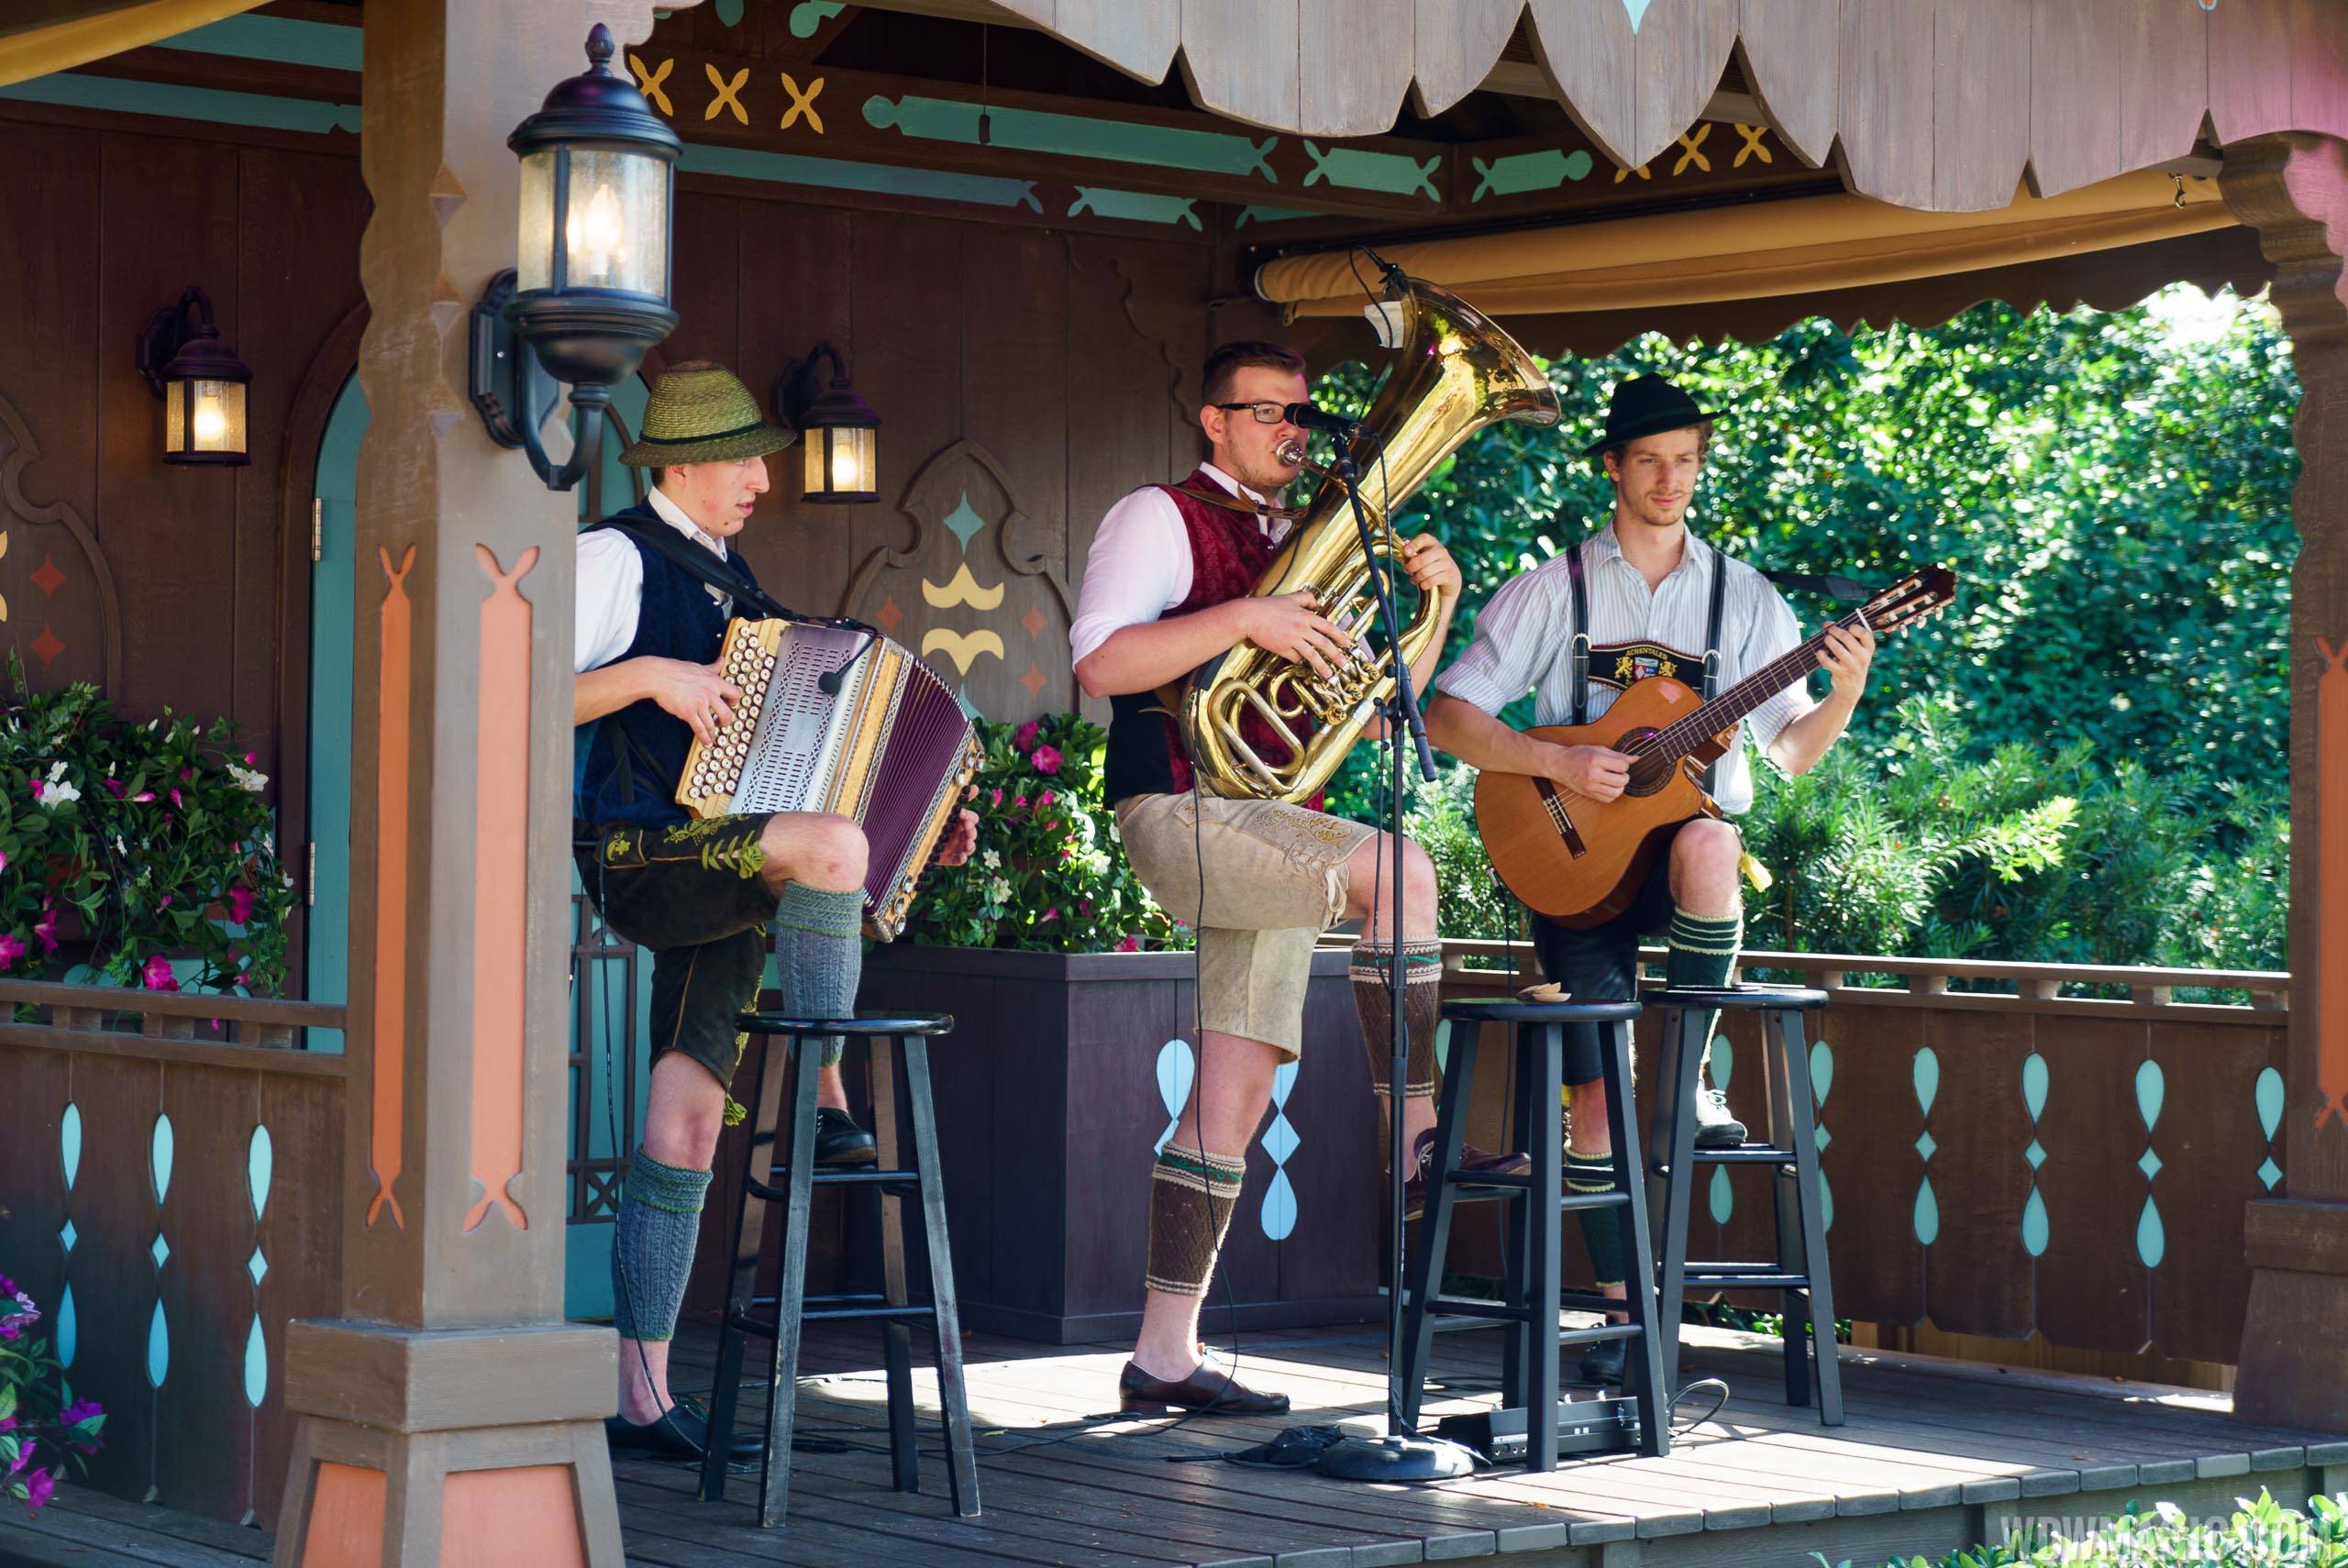 VIDEO - Wies N Buam bring traditional Bavarian music to the Germany Pavilion at Epcot